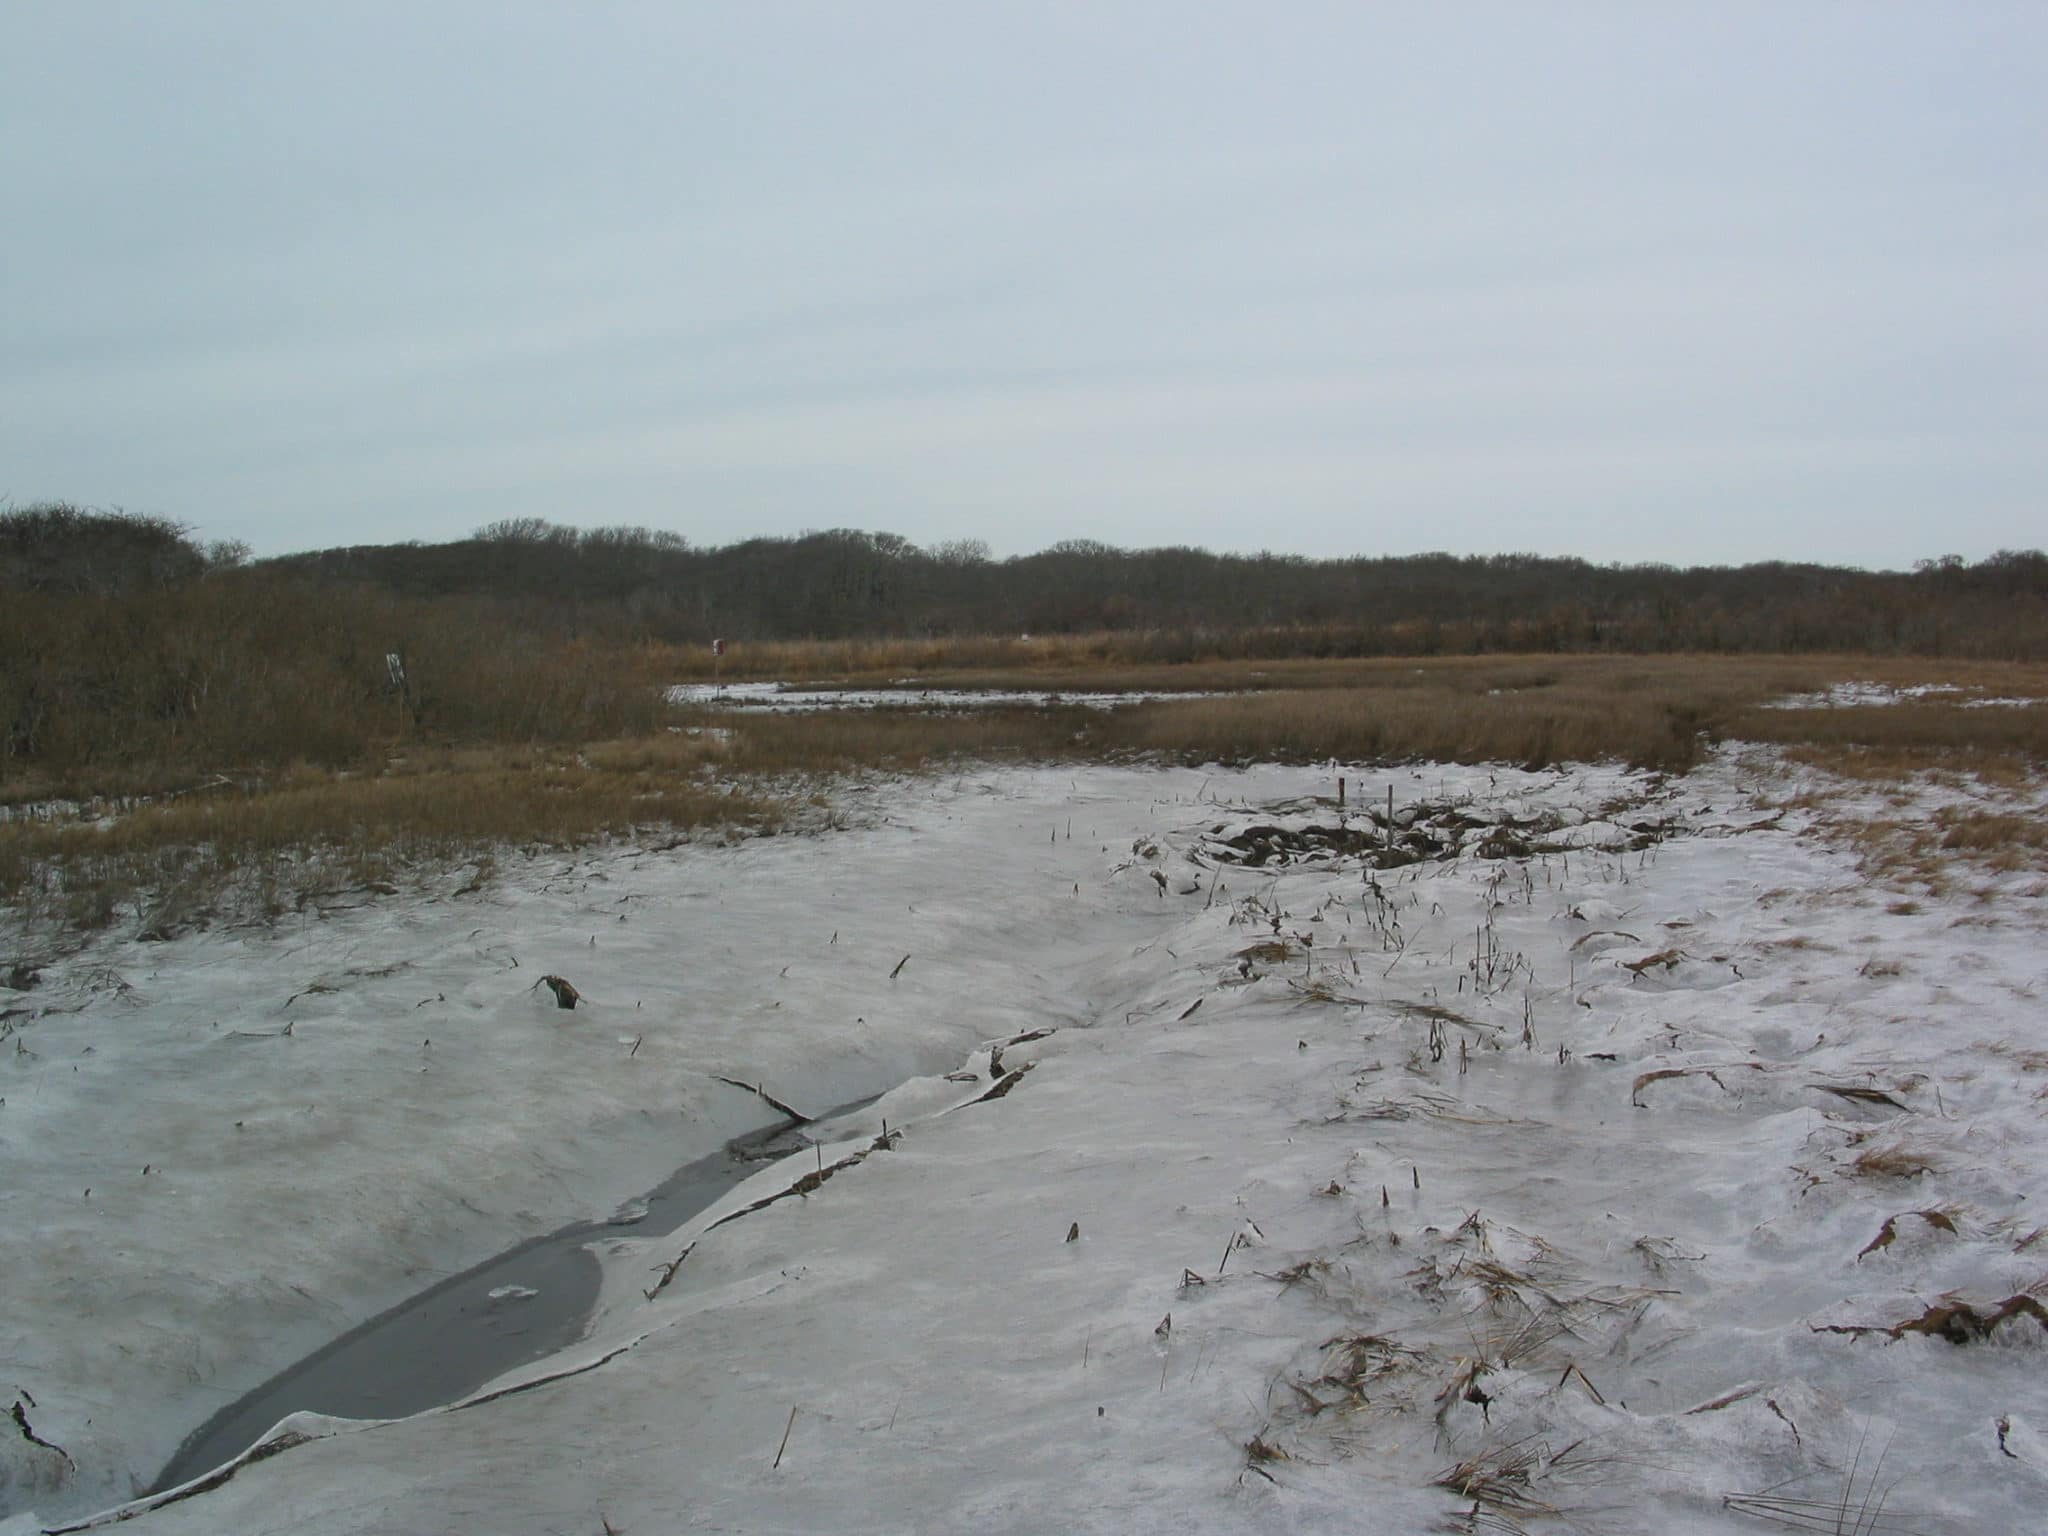 Covered in ice, the salt marsh is busy preparing for spring.